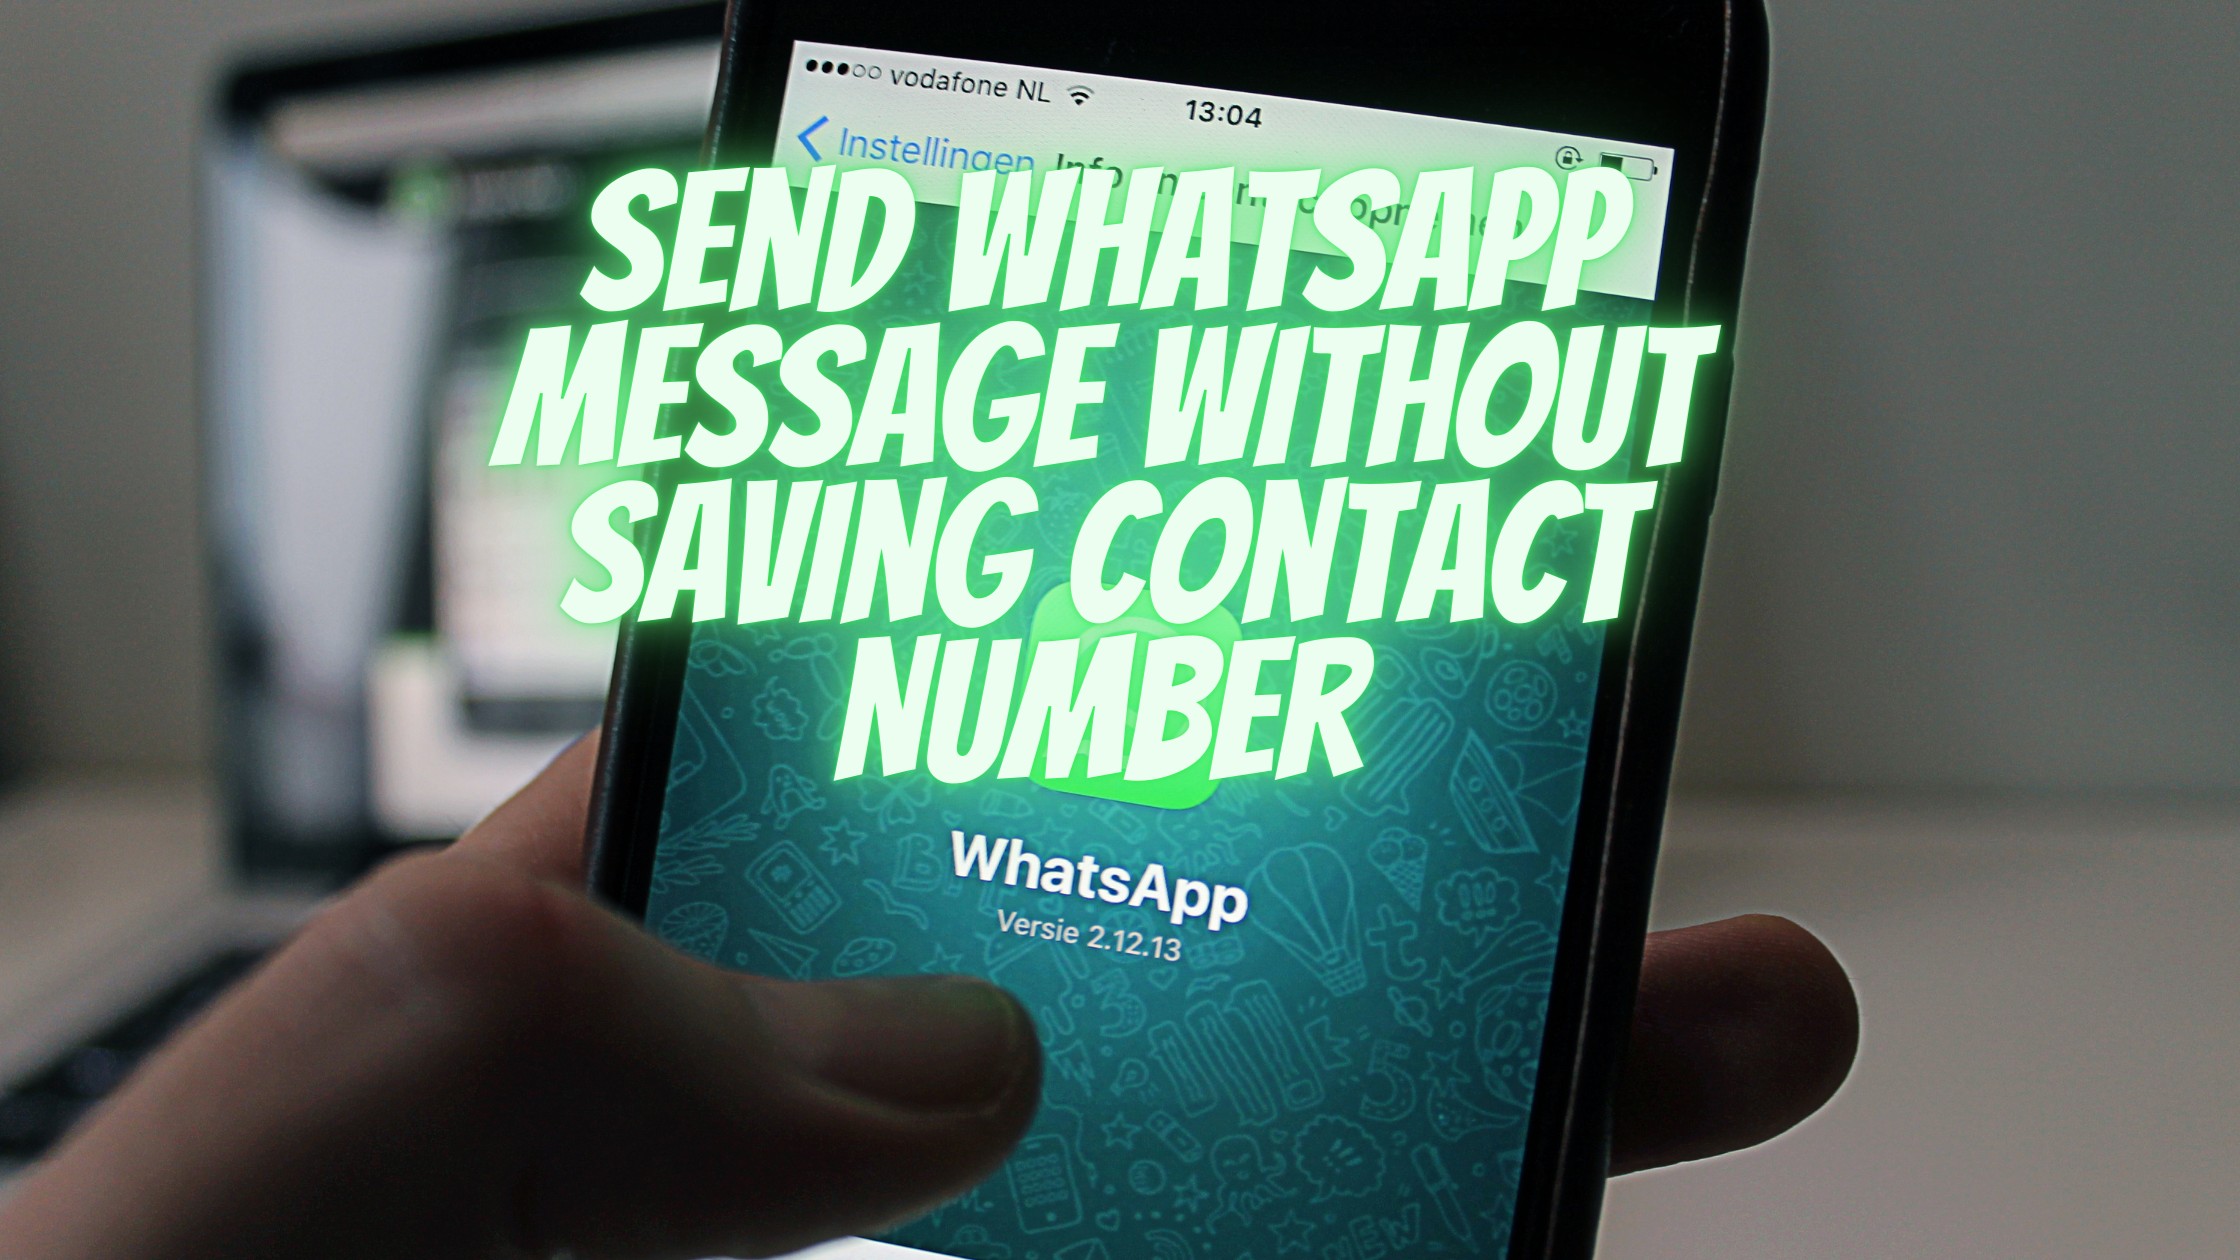 How To Send WhatsApp Message Without Saving Contact Number